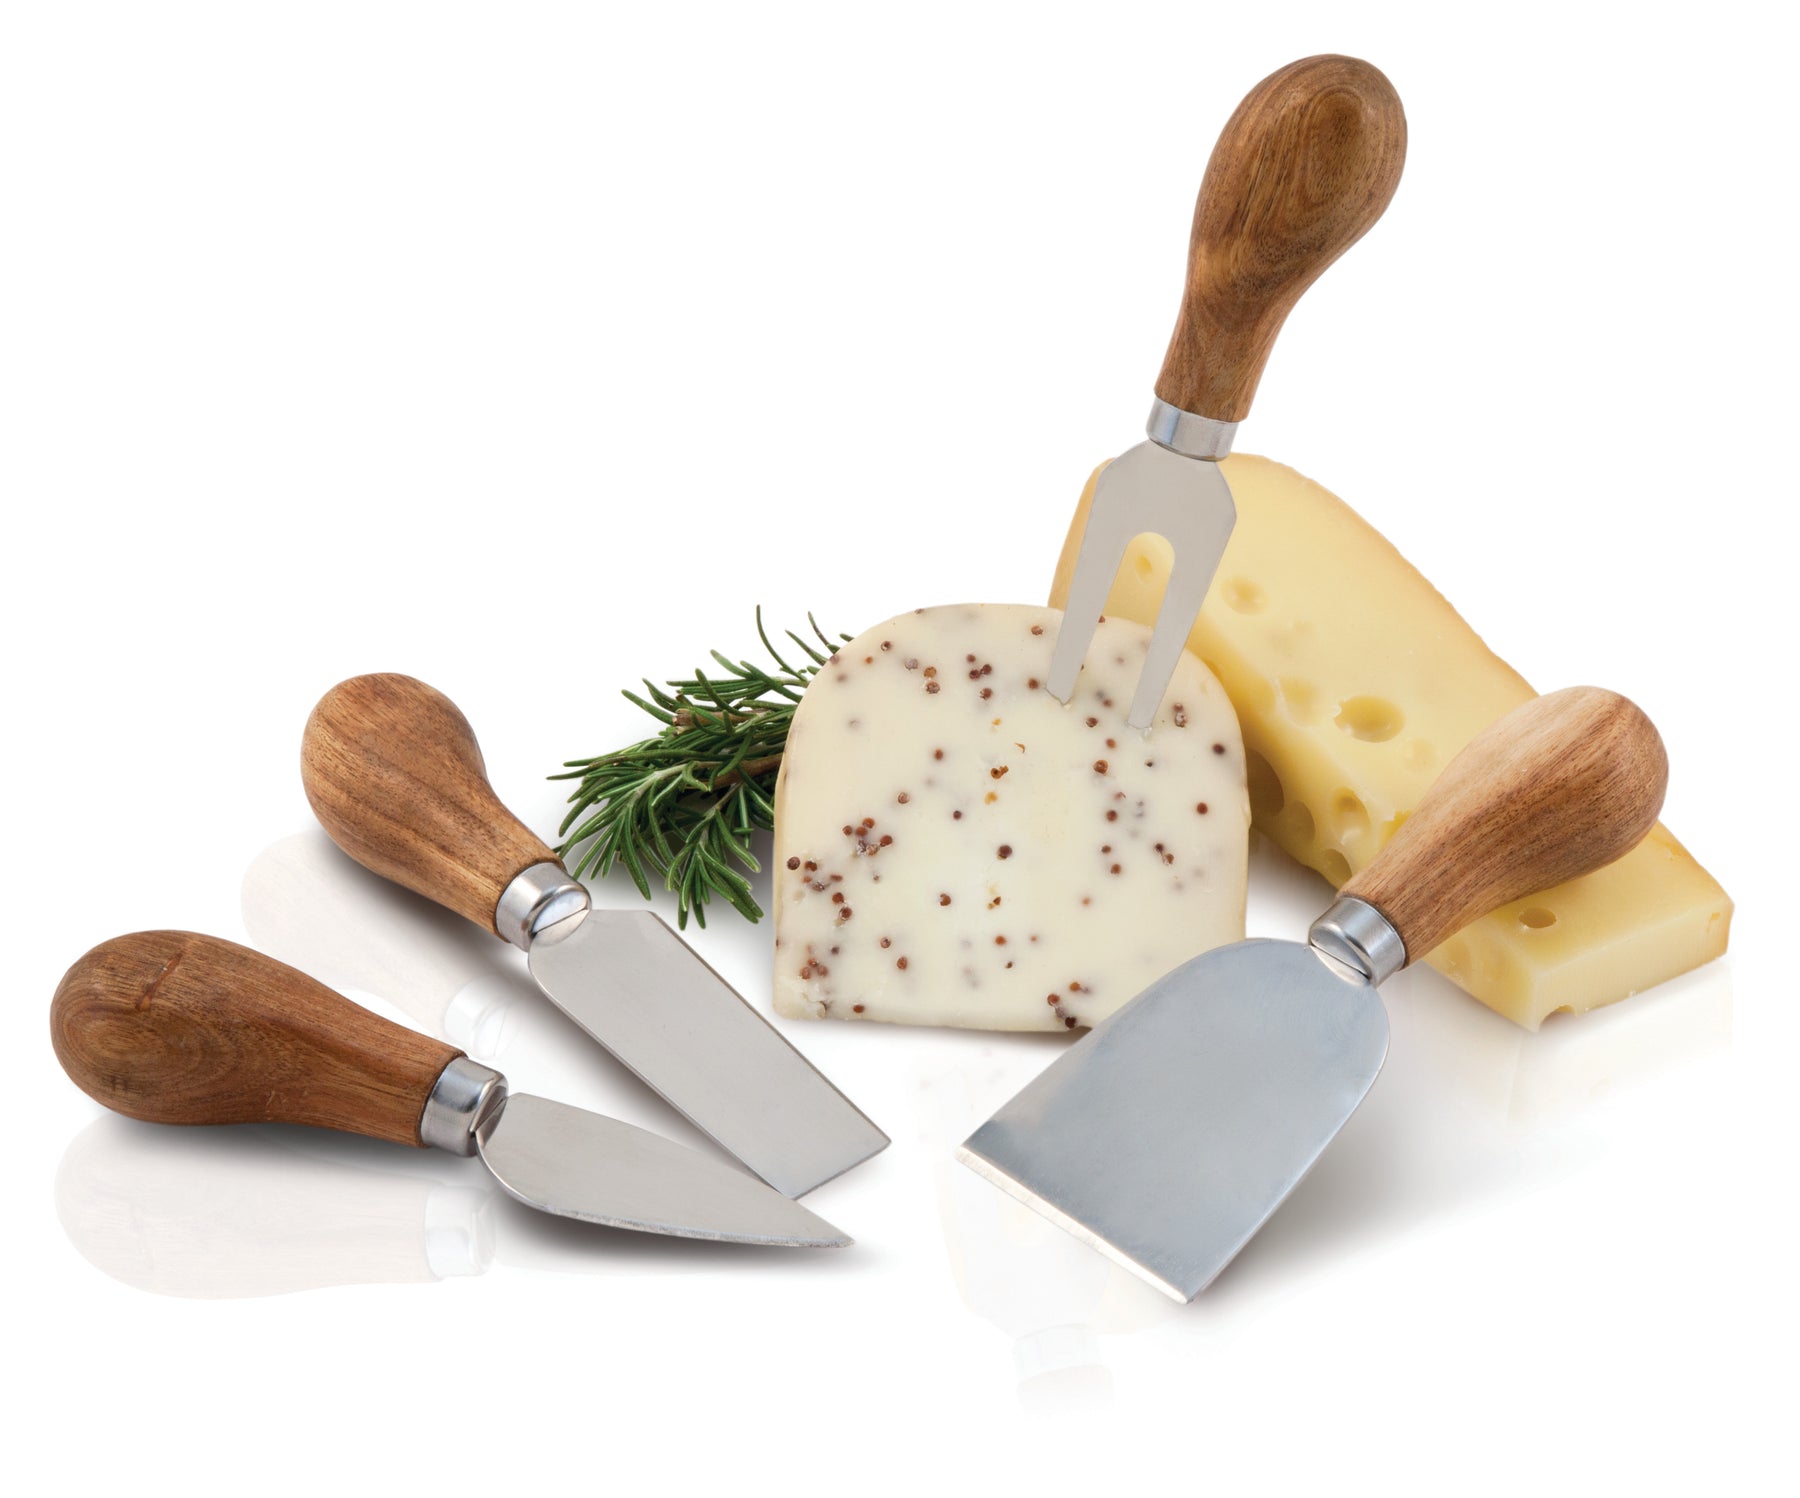 Cheese knife set “Lattevivo” in stainless steel and wood – LEGNOART